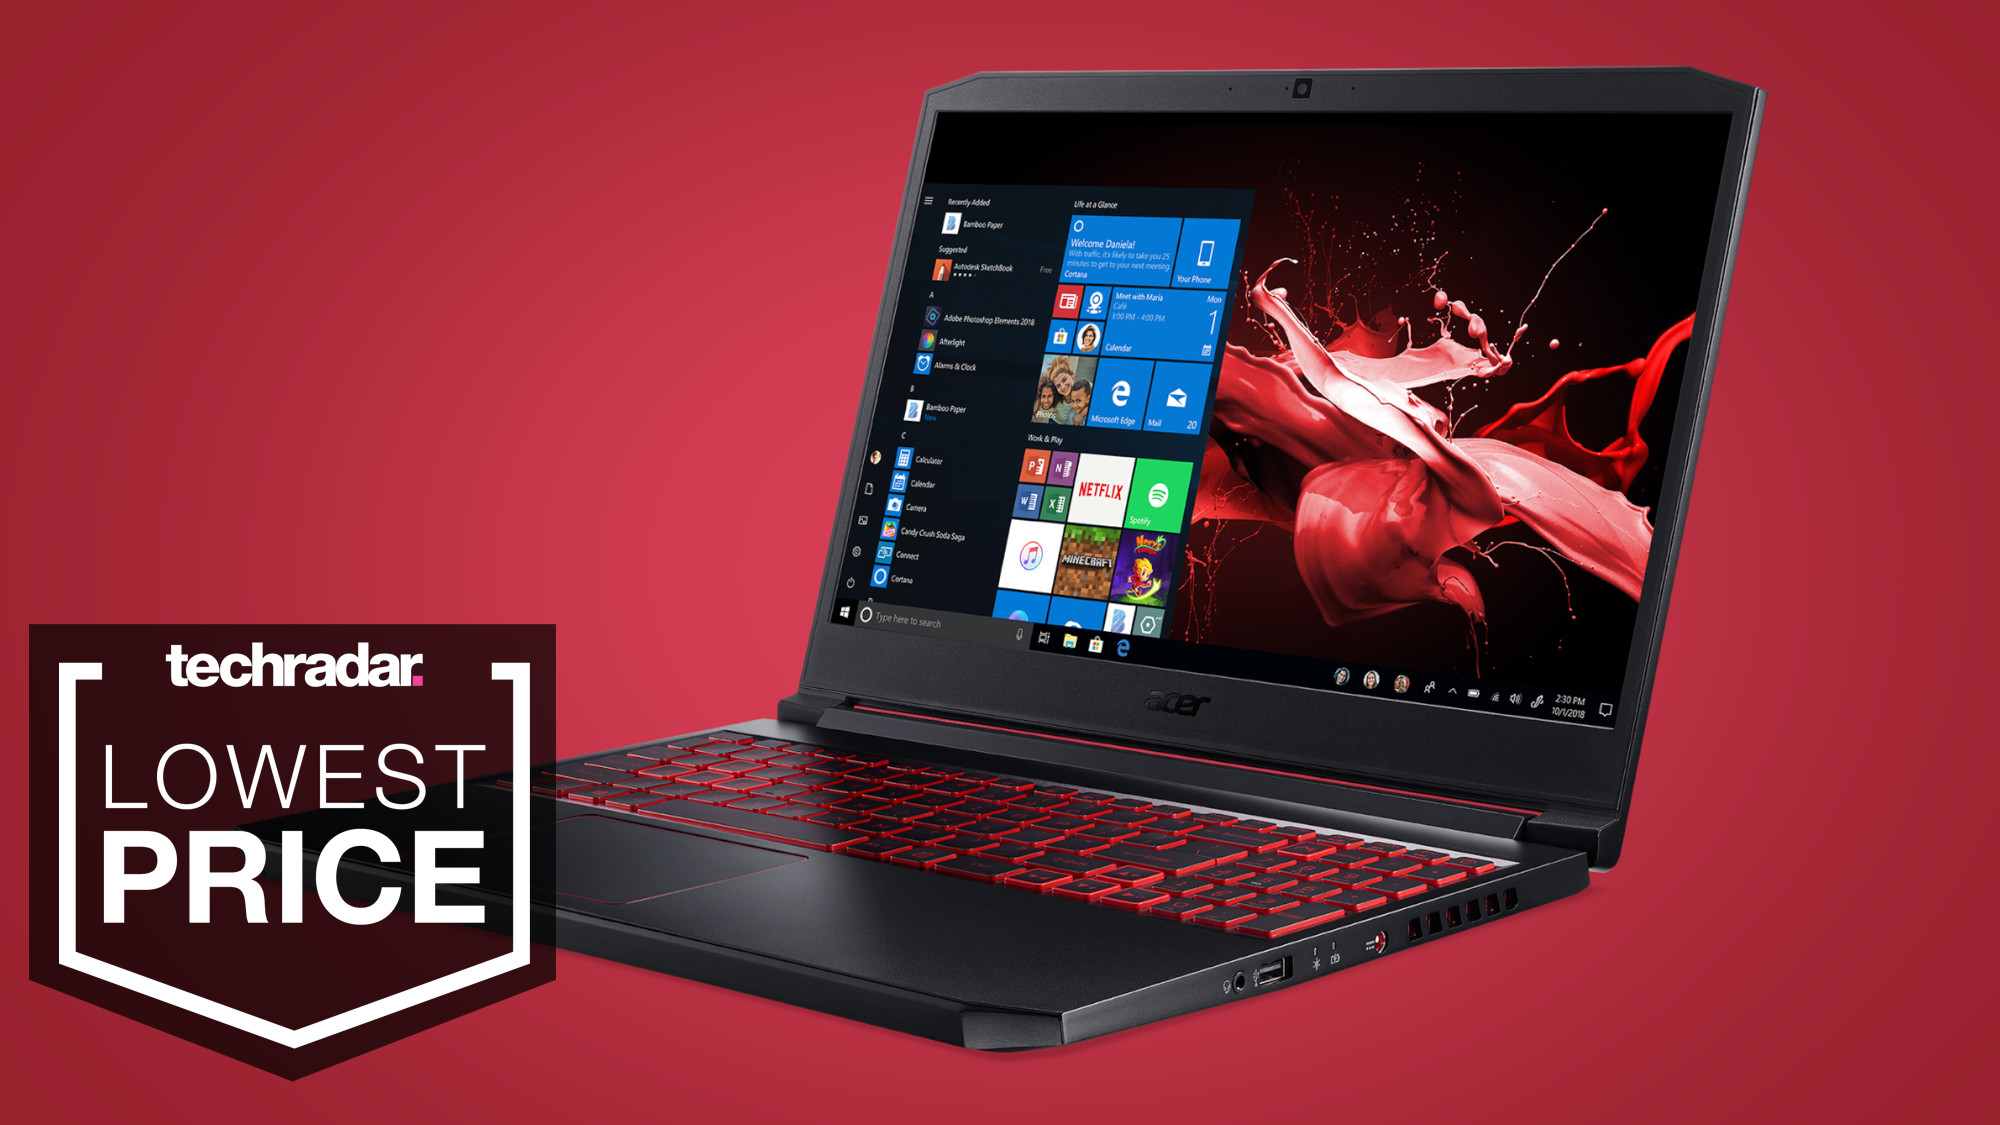 Best Buy’s 12 Days of Deals offers a gaming laptop at its lowest price